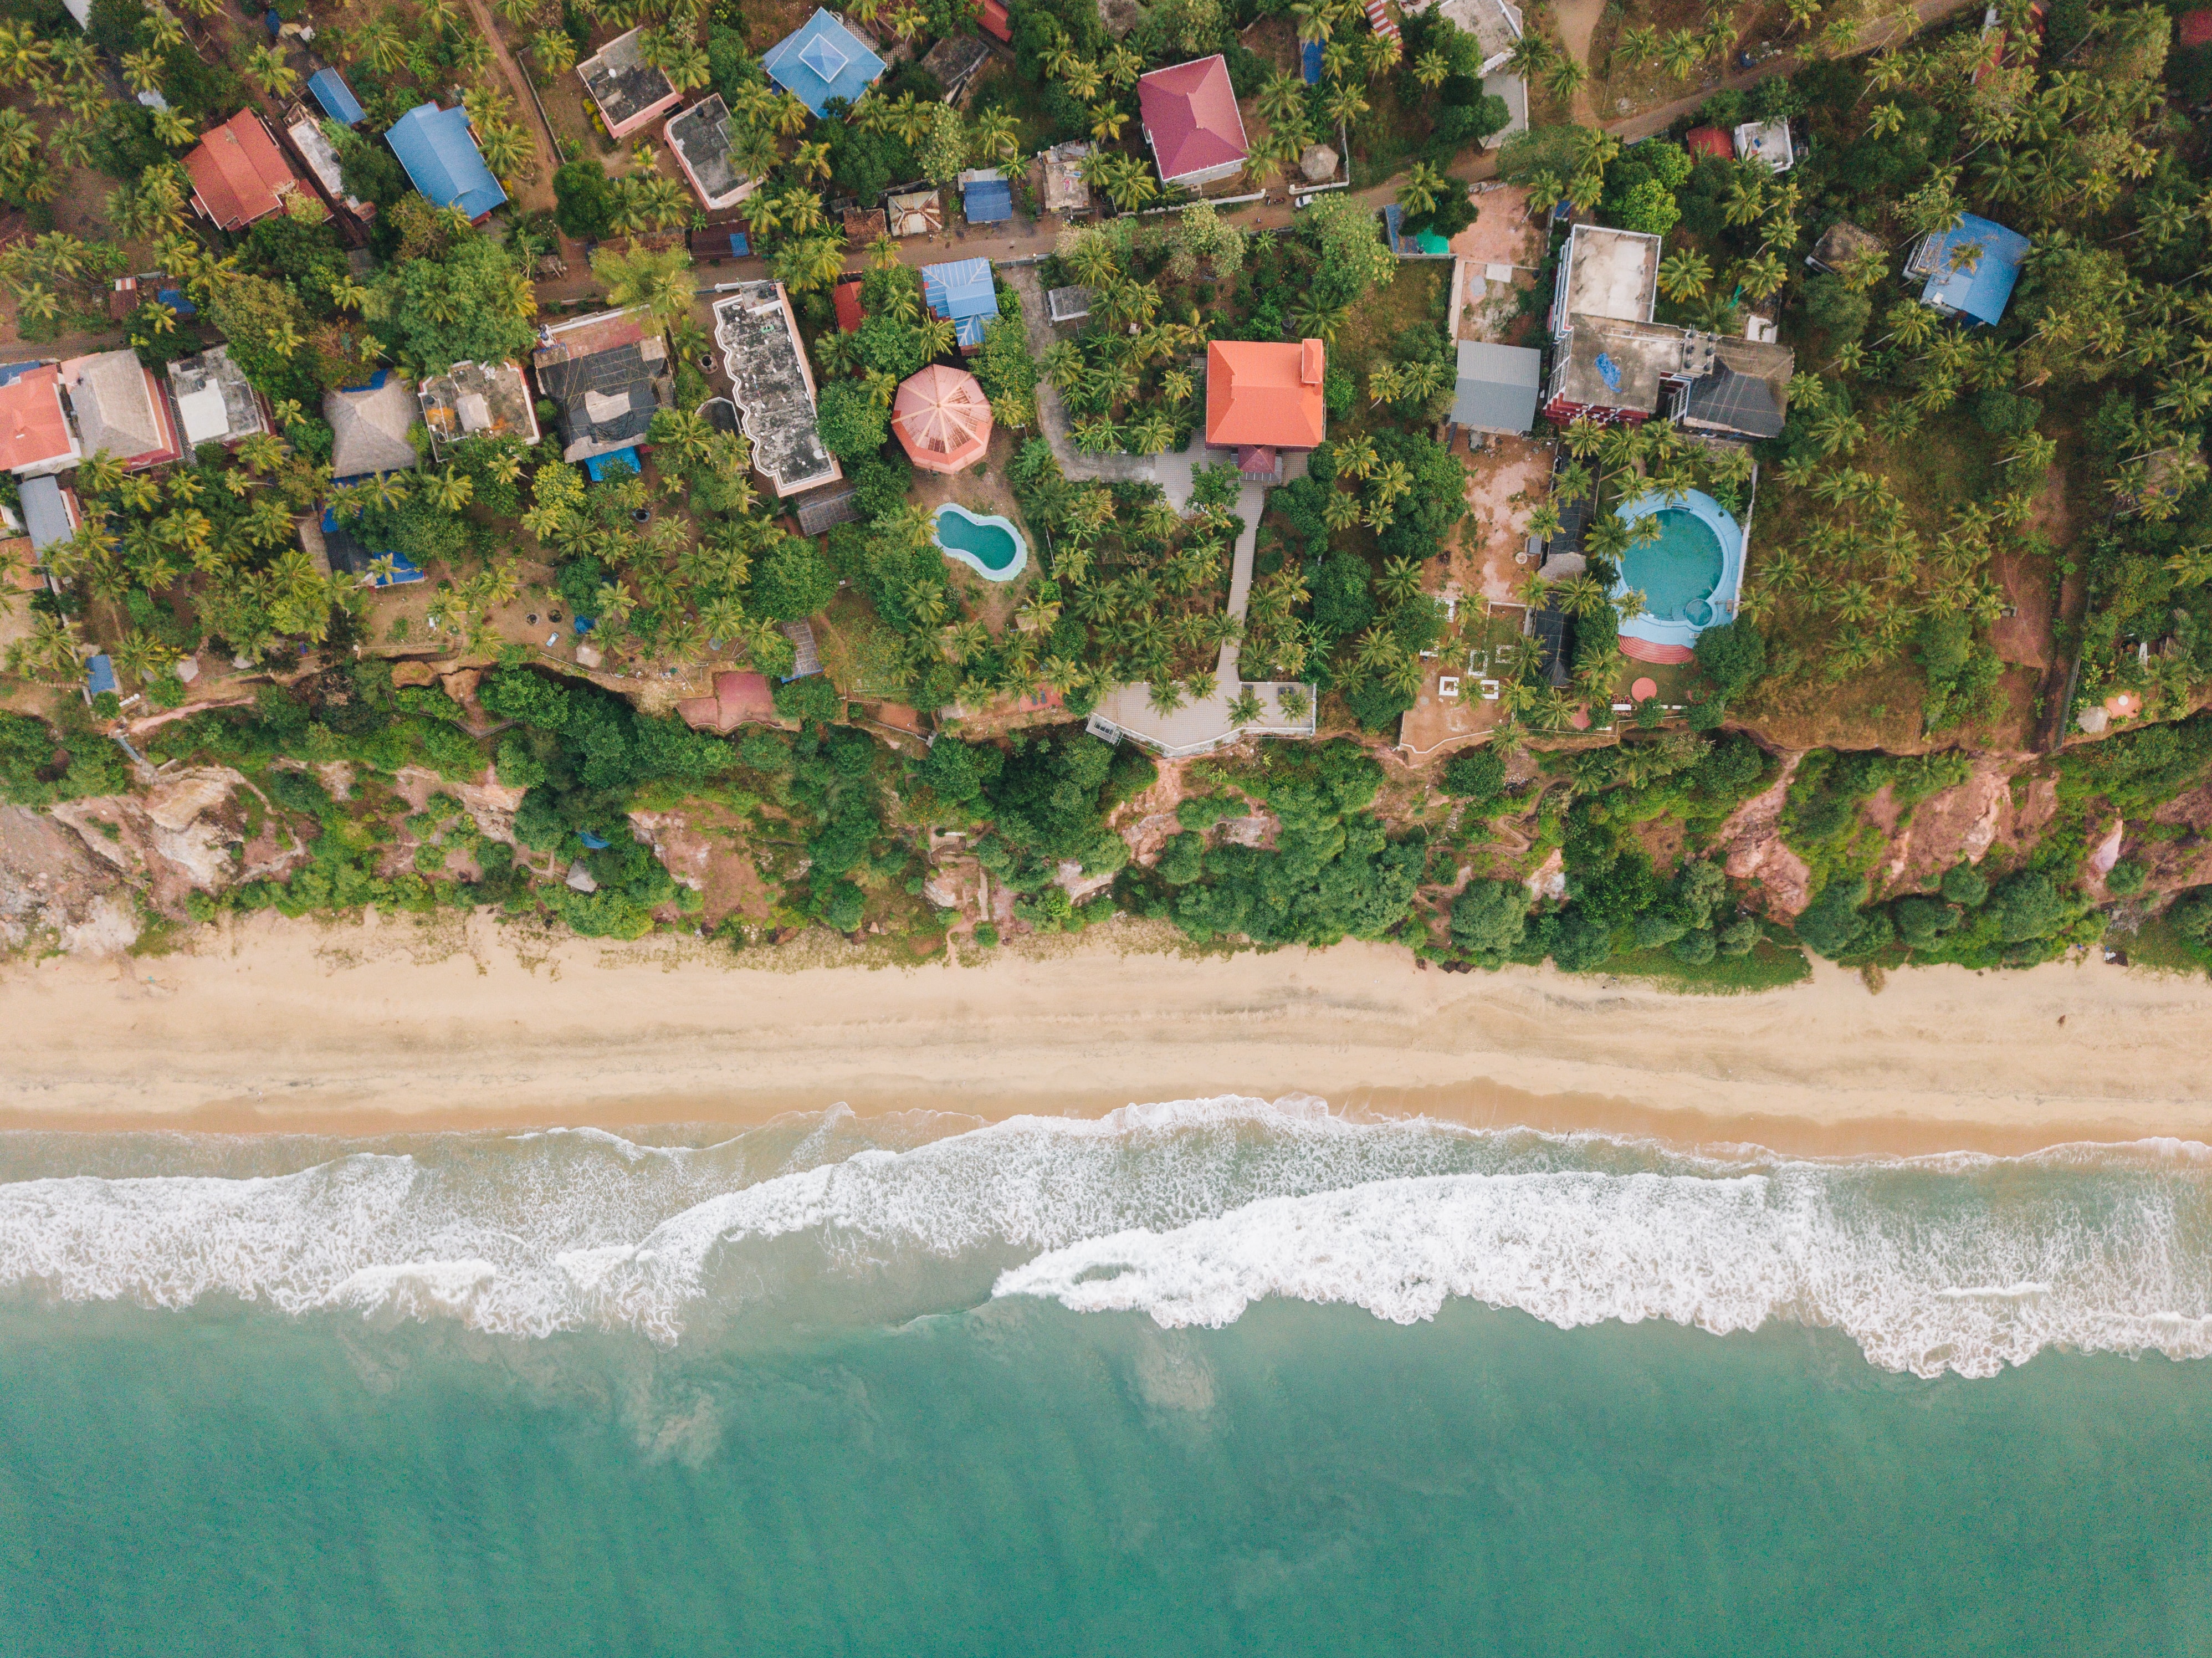 shore, view from above, nature, beach, palms, building, bank